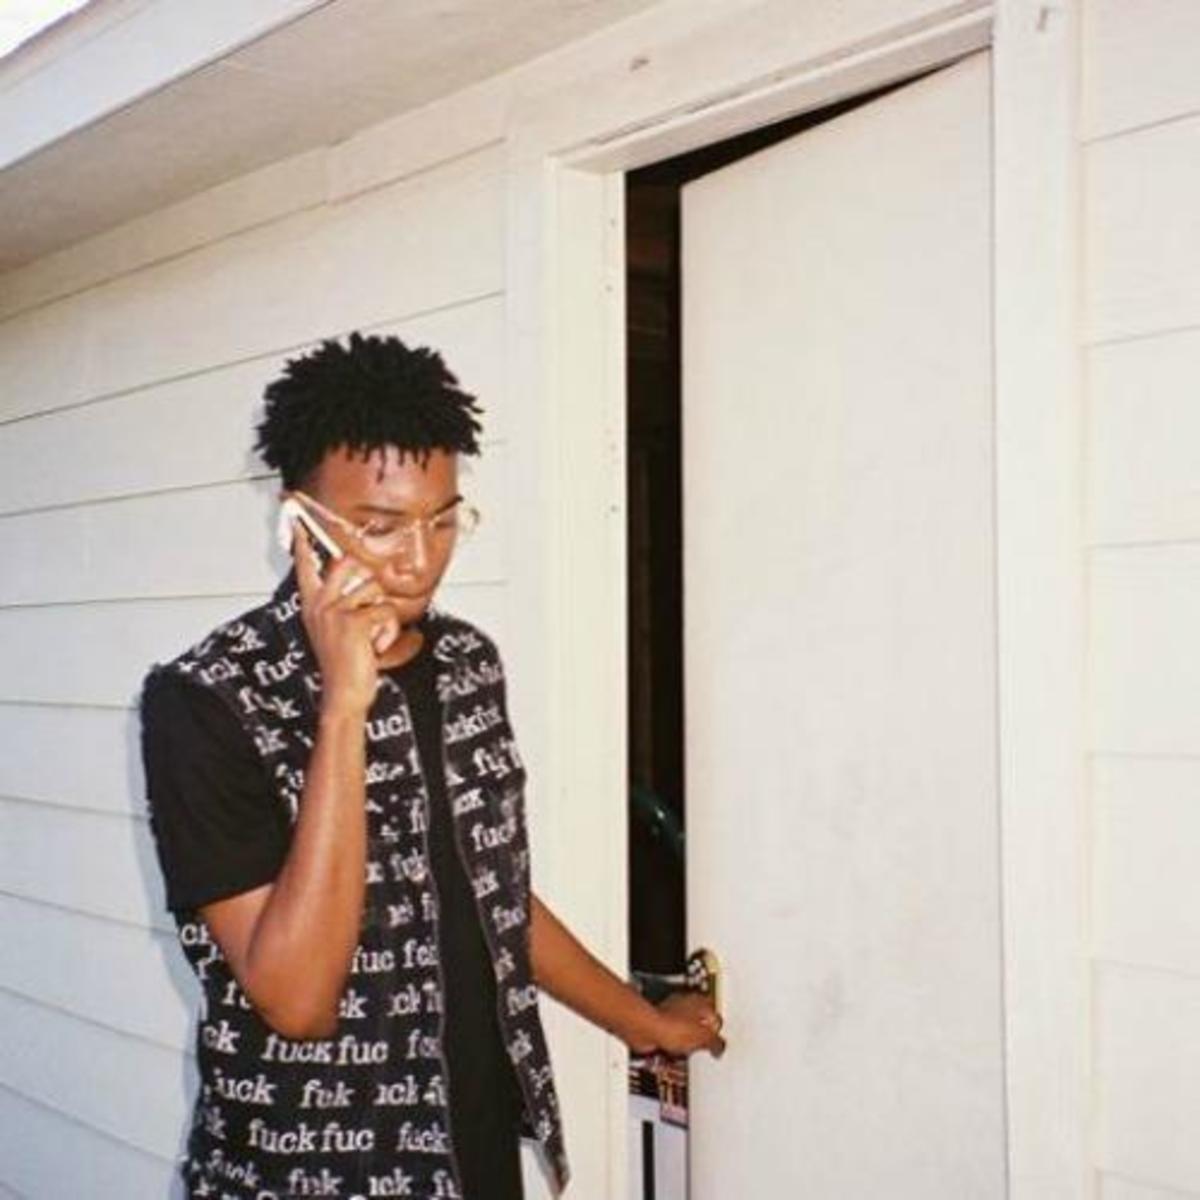 Premiere: Hear Two New Songs From Playboi Carti, "Money Counter" and